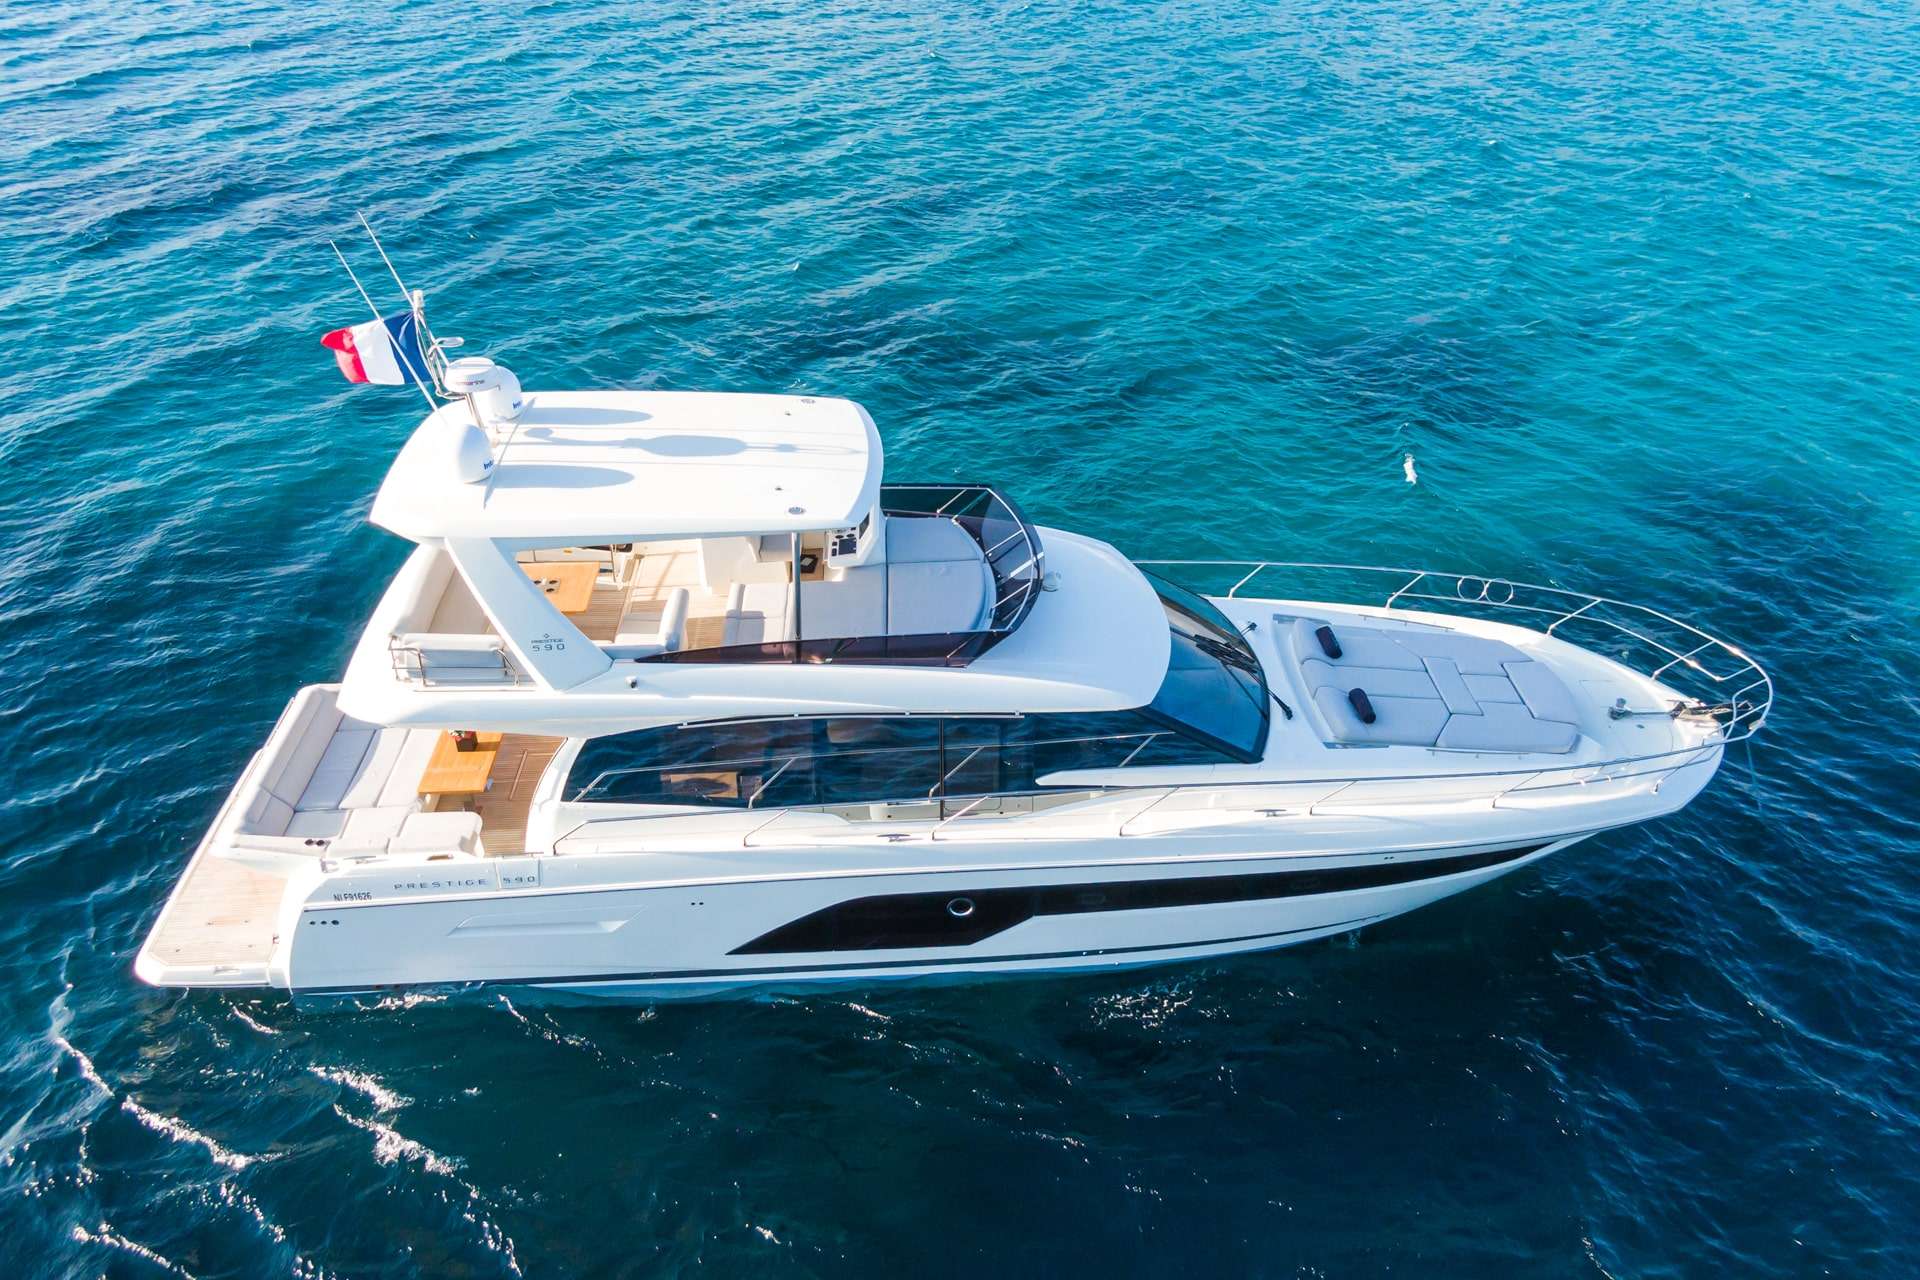 590 Fly - Yacht Charter Cannes & Boat hire in France French Riviera Cannes Vieux port de Vallauris 3